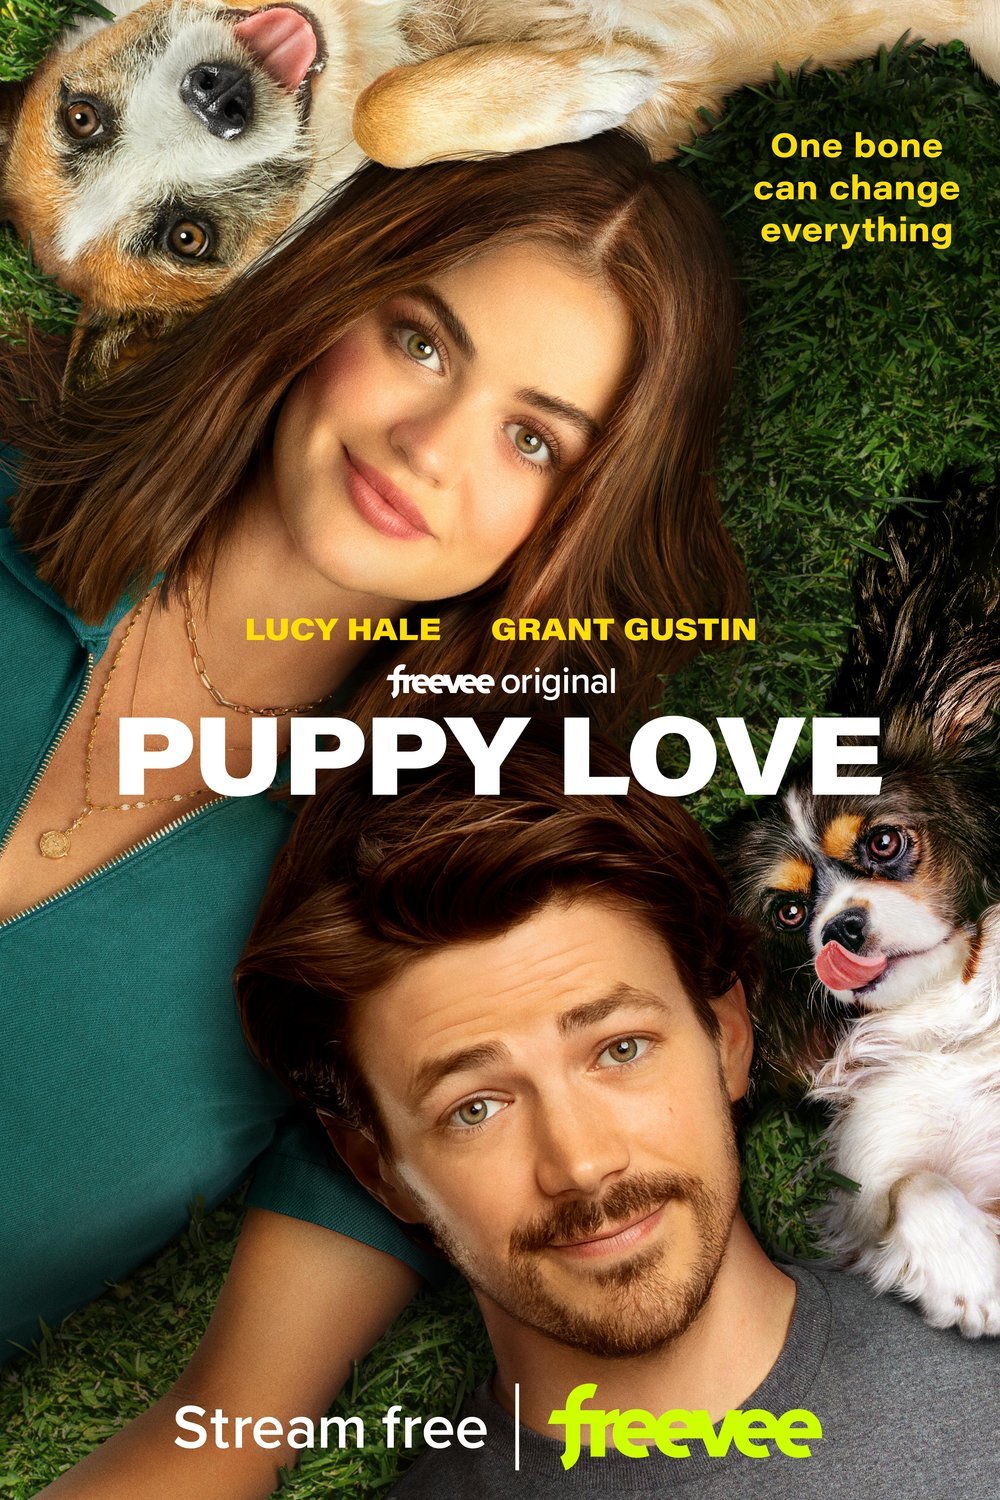 Poster of the movie Puppy Love